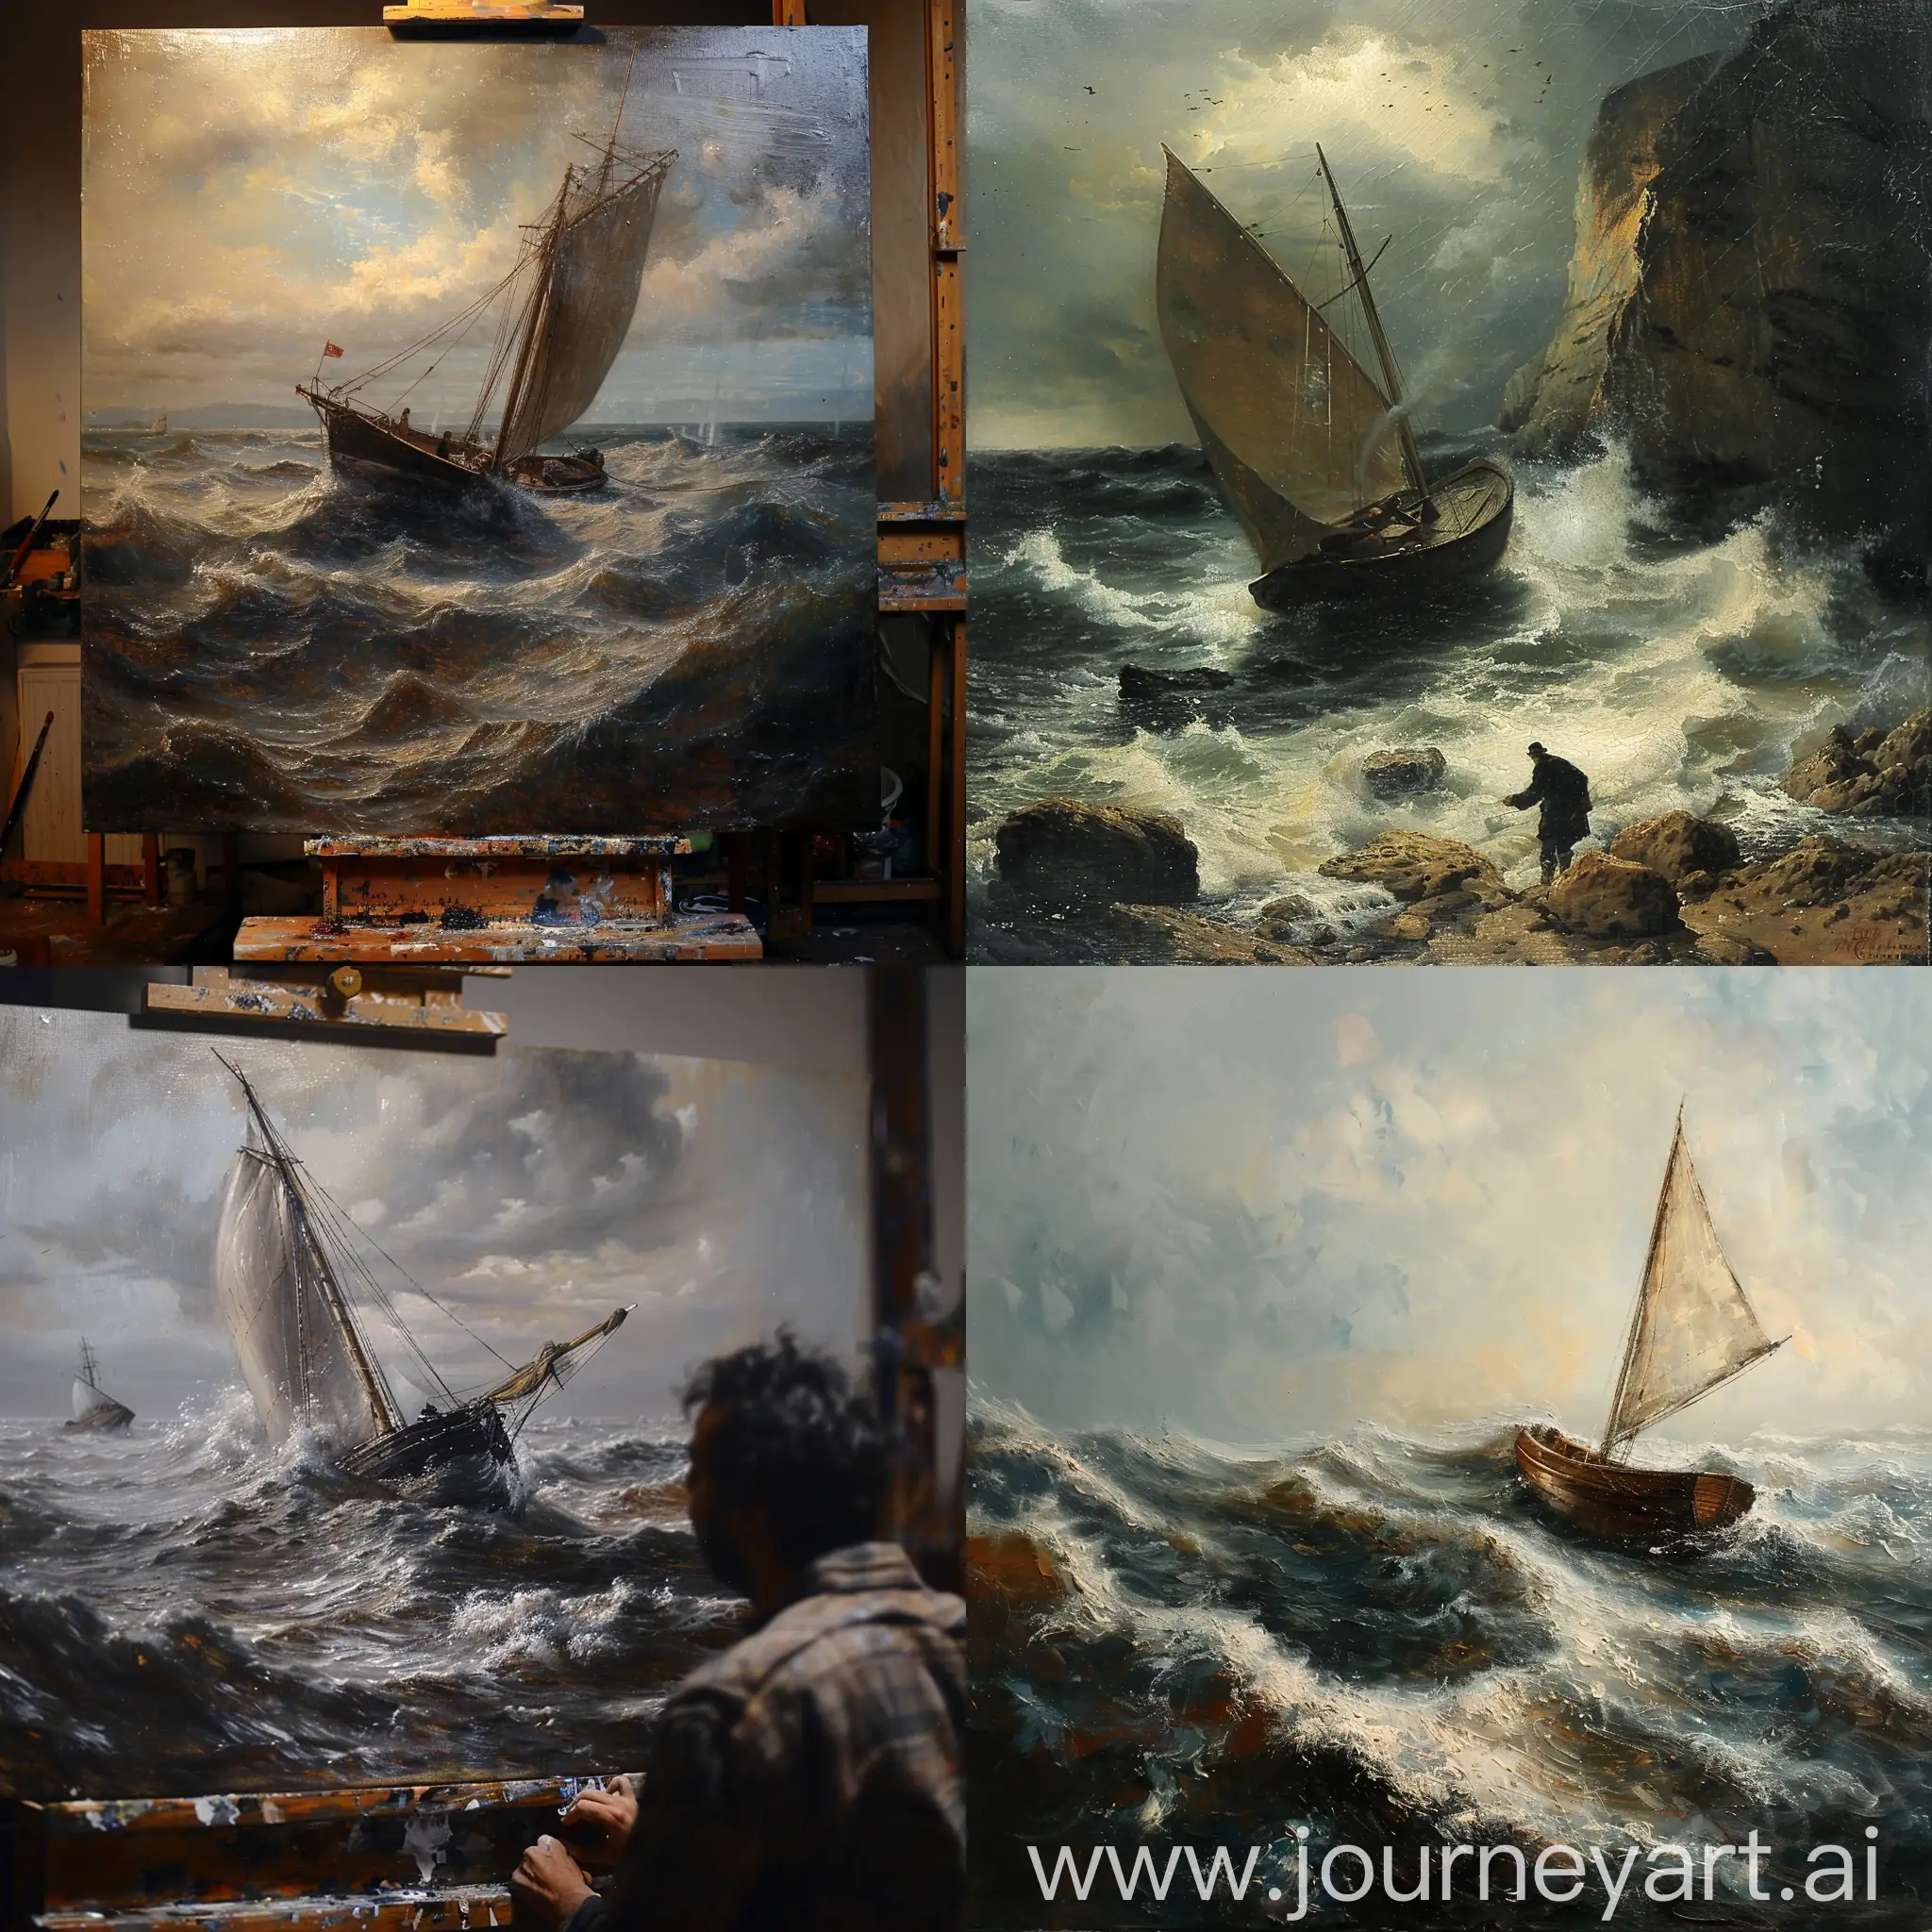 Captivating-Foreshortened-Seascape-Boat-Emerges-from-Painting